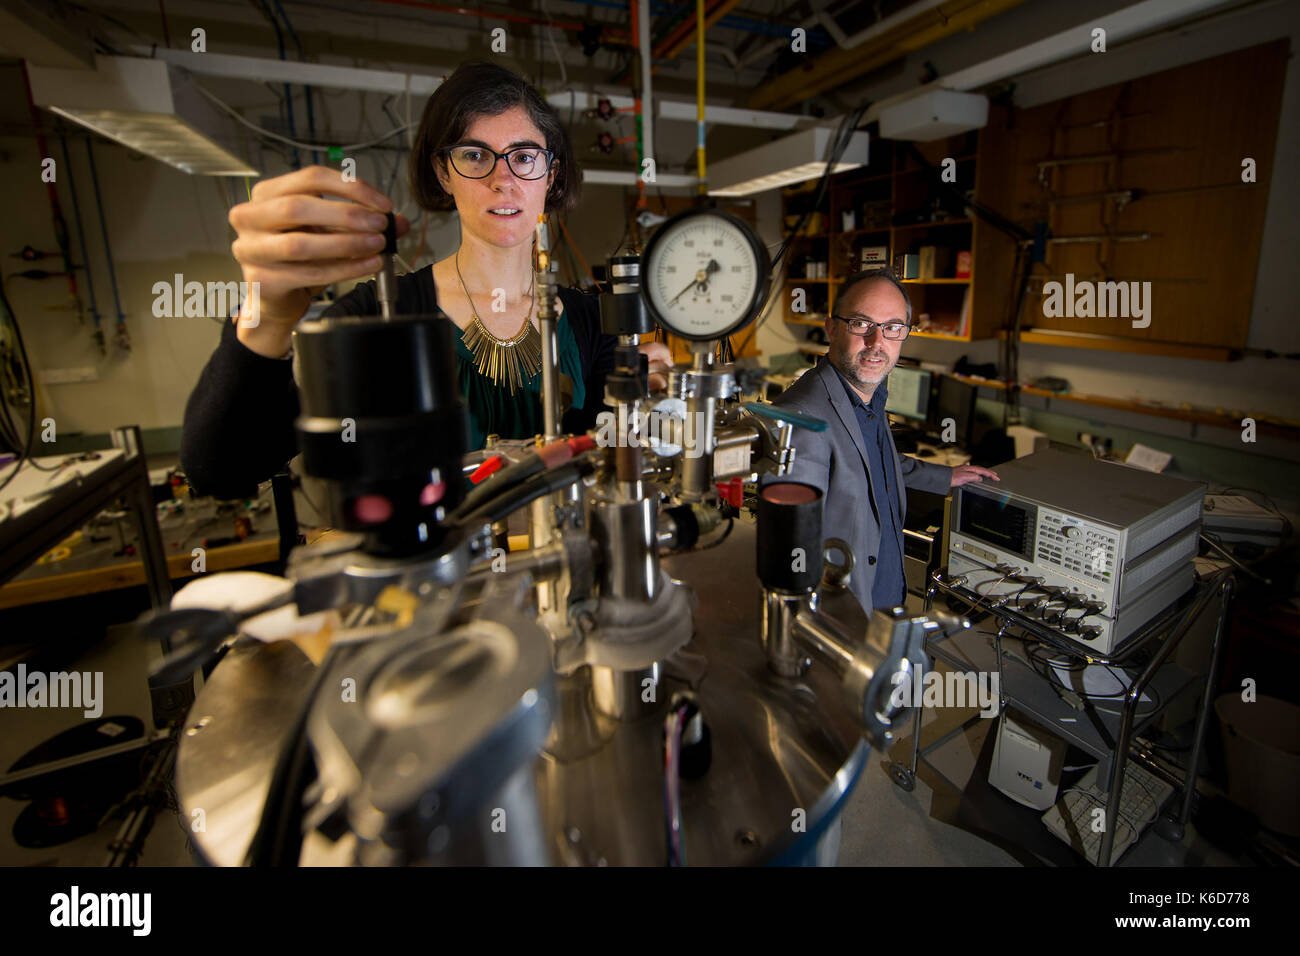 Canberra, Canberra. 6th Sep, 2017. Doctor Rose Ahlefeldt (L) and Associate Professor Matthew Sellars operate a superconducting magnet cryostat, which is used in the experiment to generate a high magnetic field and extremely low temperatures in the Australian National University (ANU), Canberra, on Sept. 6, 2017. Australian scientists have made a significant breakthrough in developing an 'unhackable' quantum internet, it was announced on Sept. 12. Credit: ANU/Stuart Hay/Xinhua/Alamy Live News Stock Photo